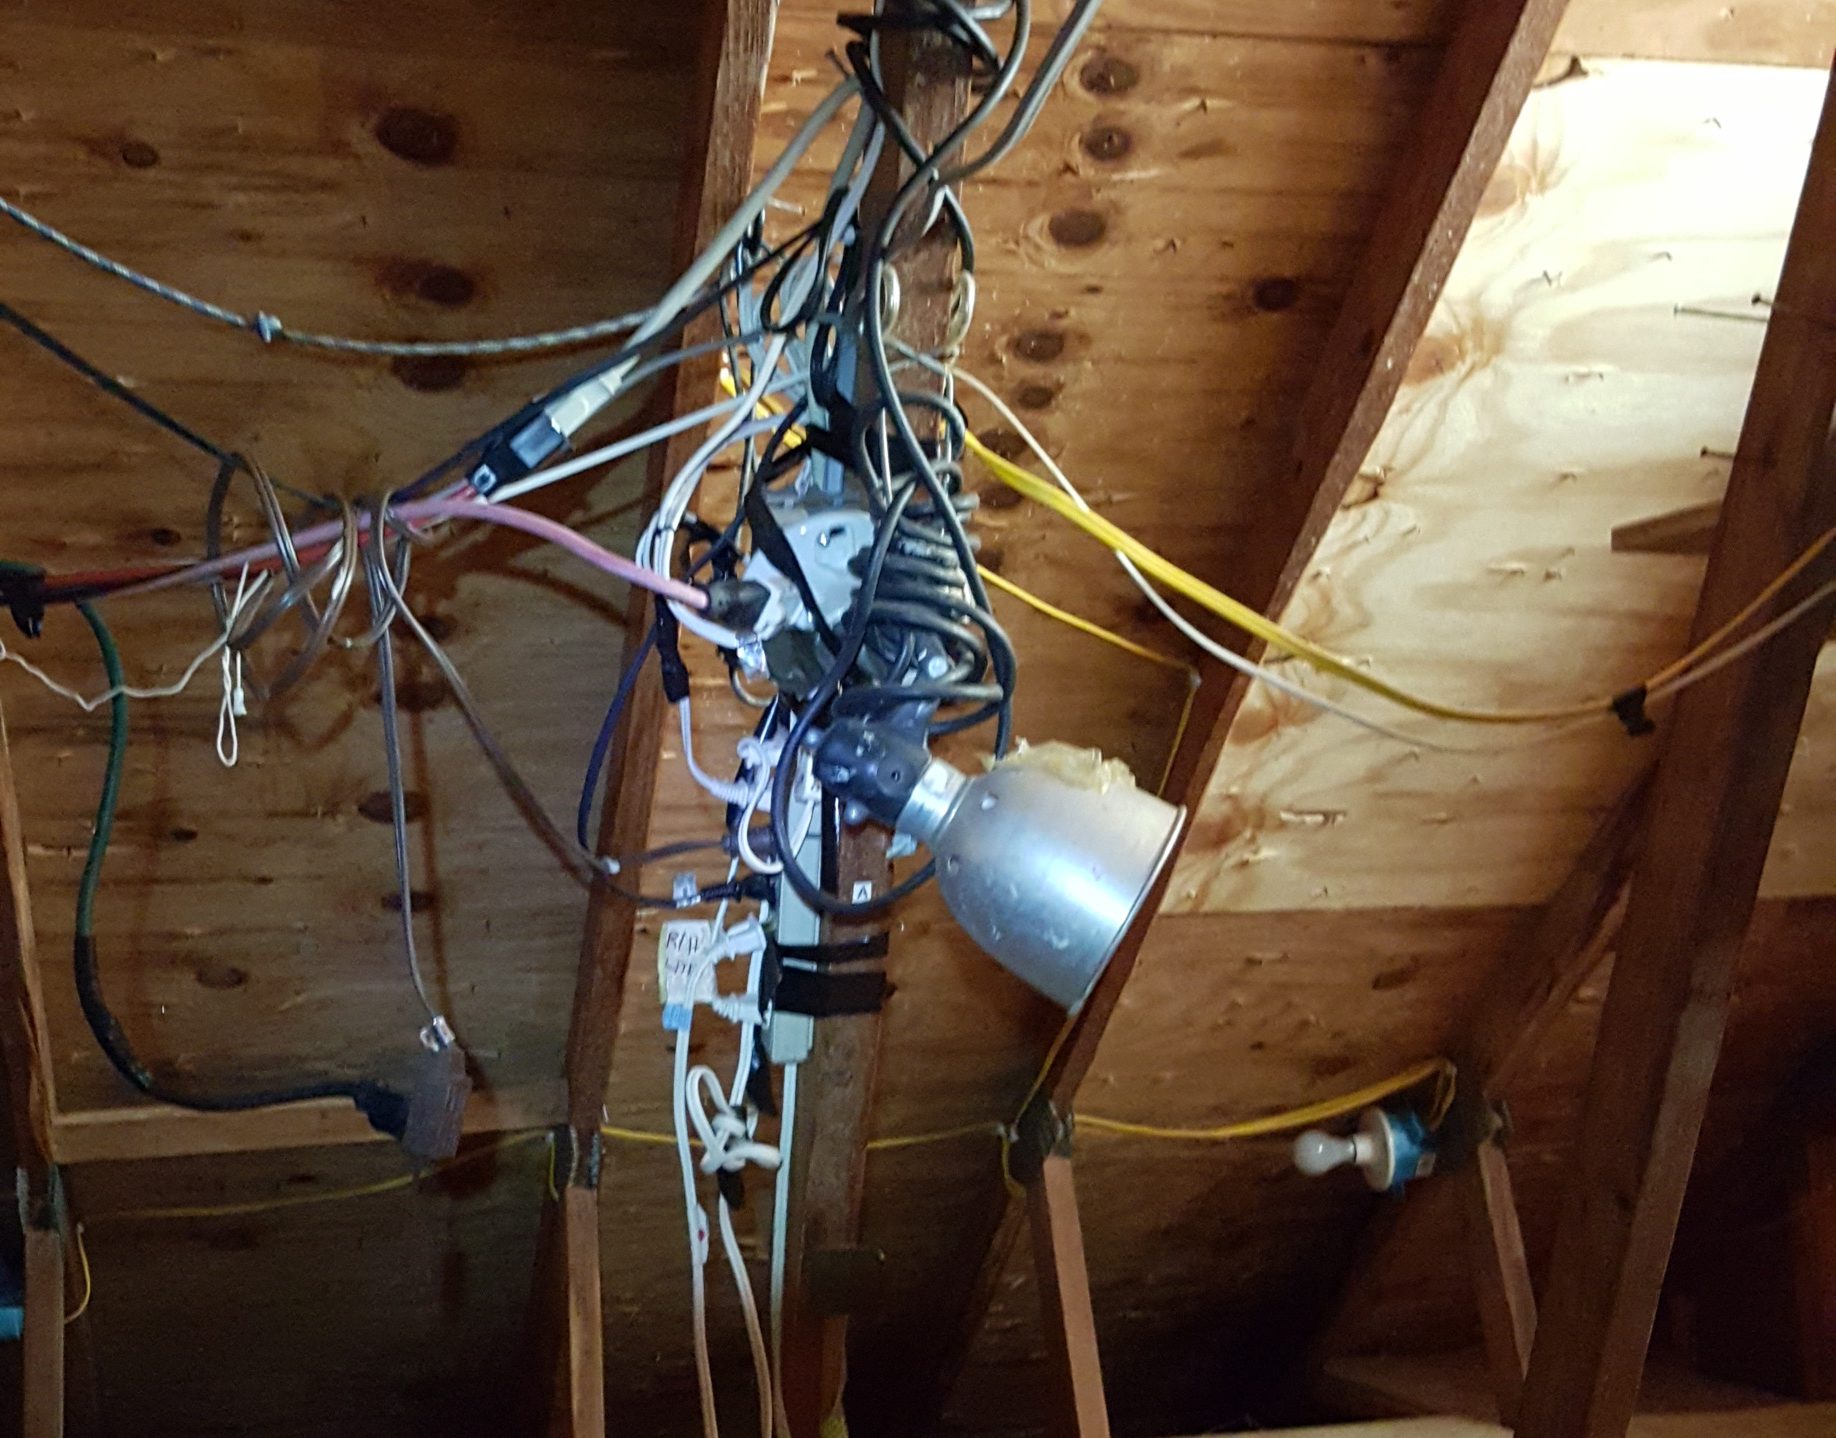 Unsafe electrical connections in attic